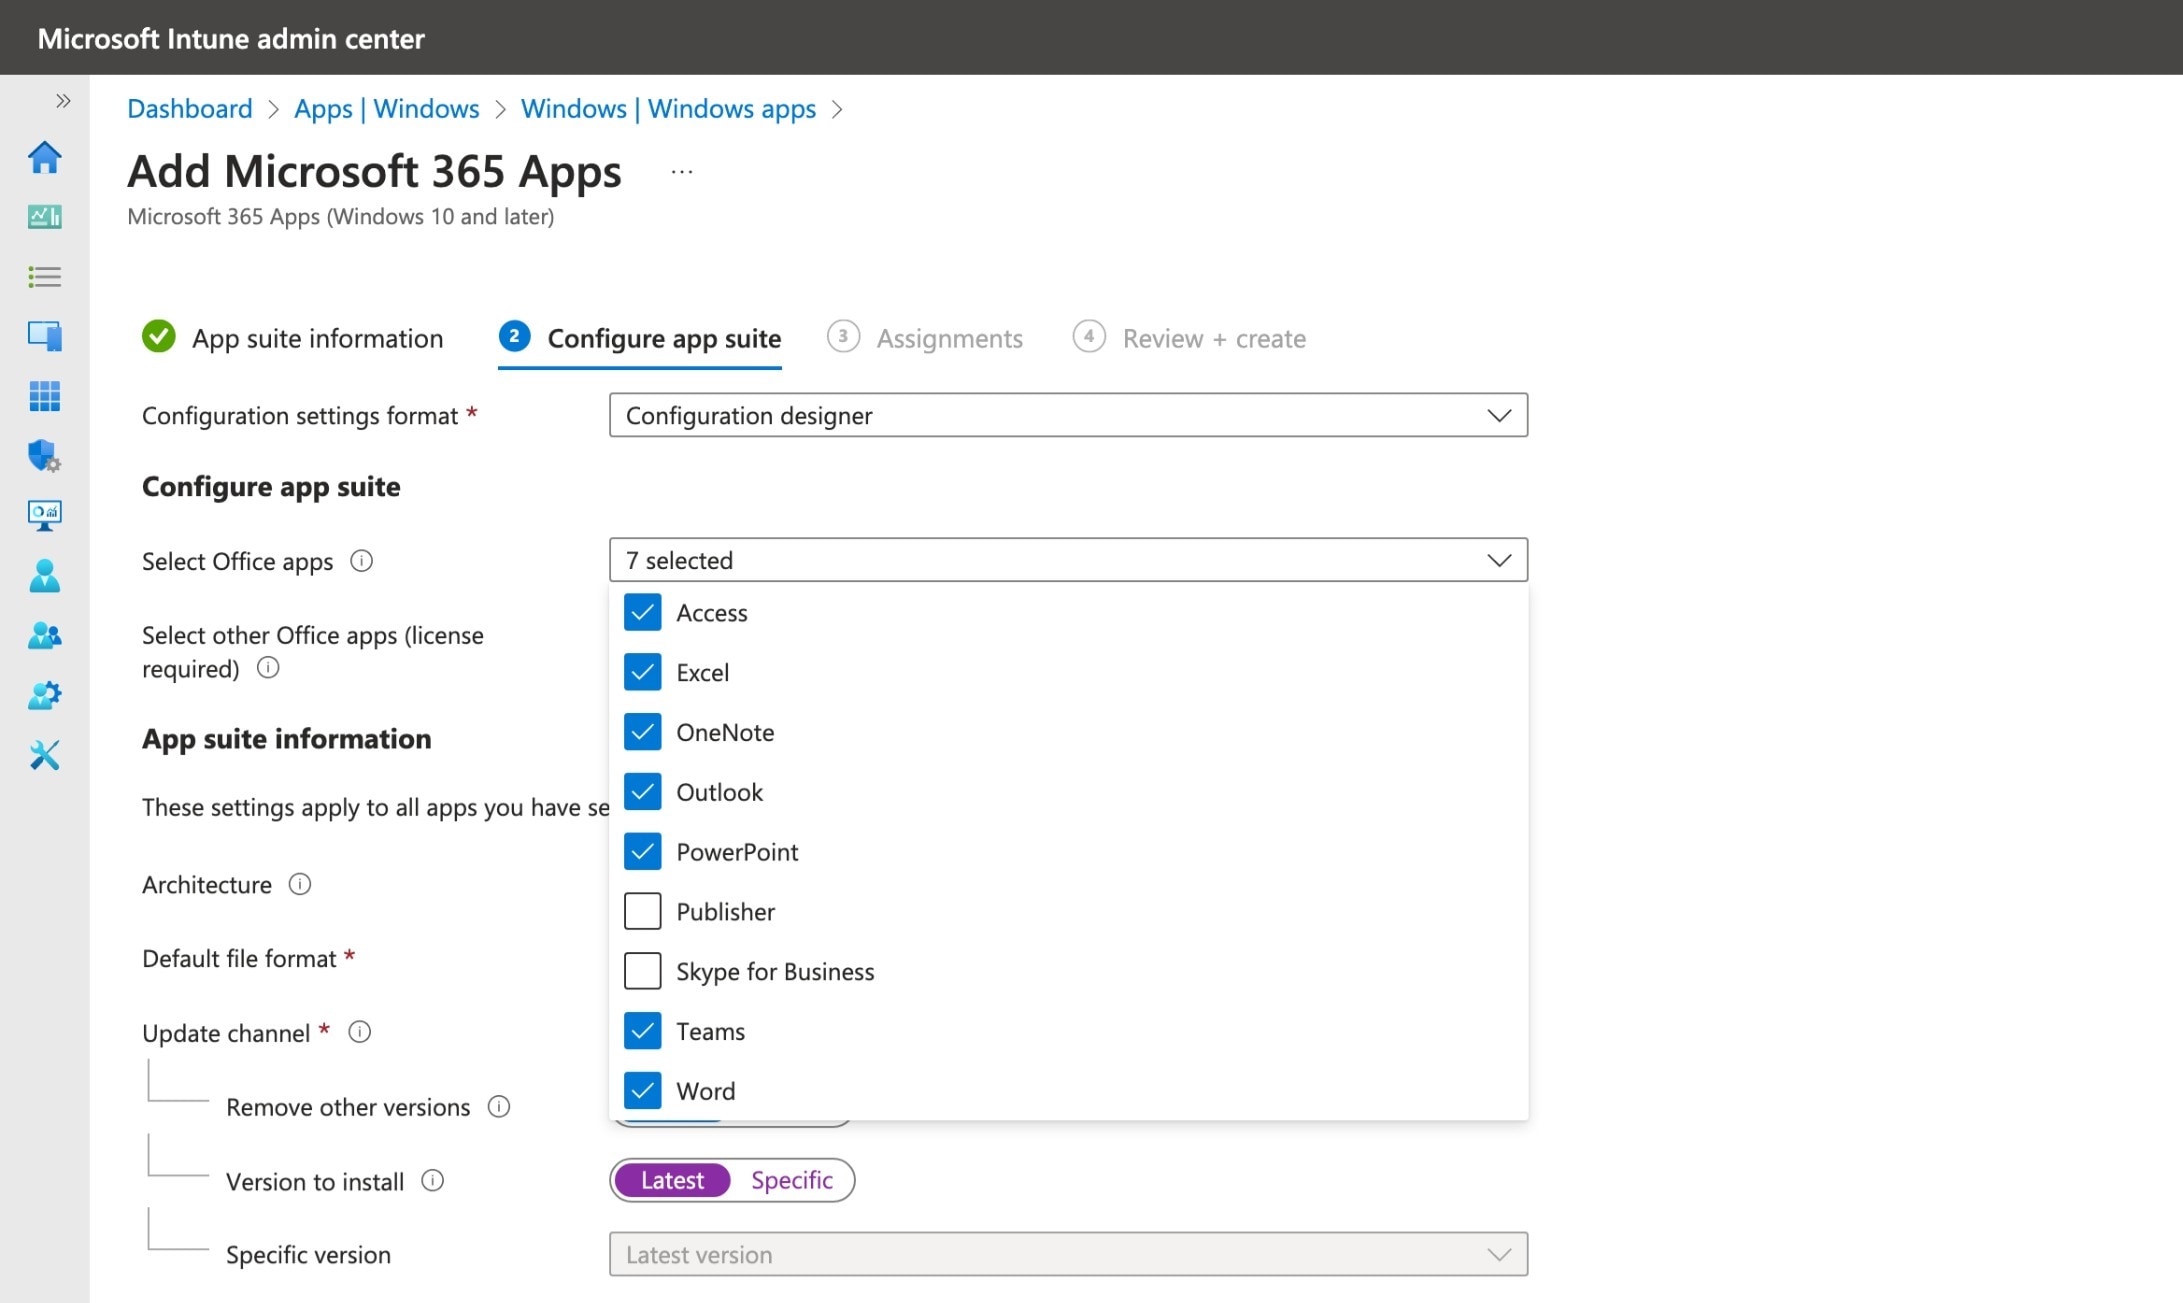 Creating a Microsoft 365 Apps package in Intune